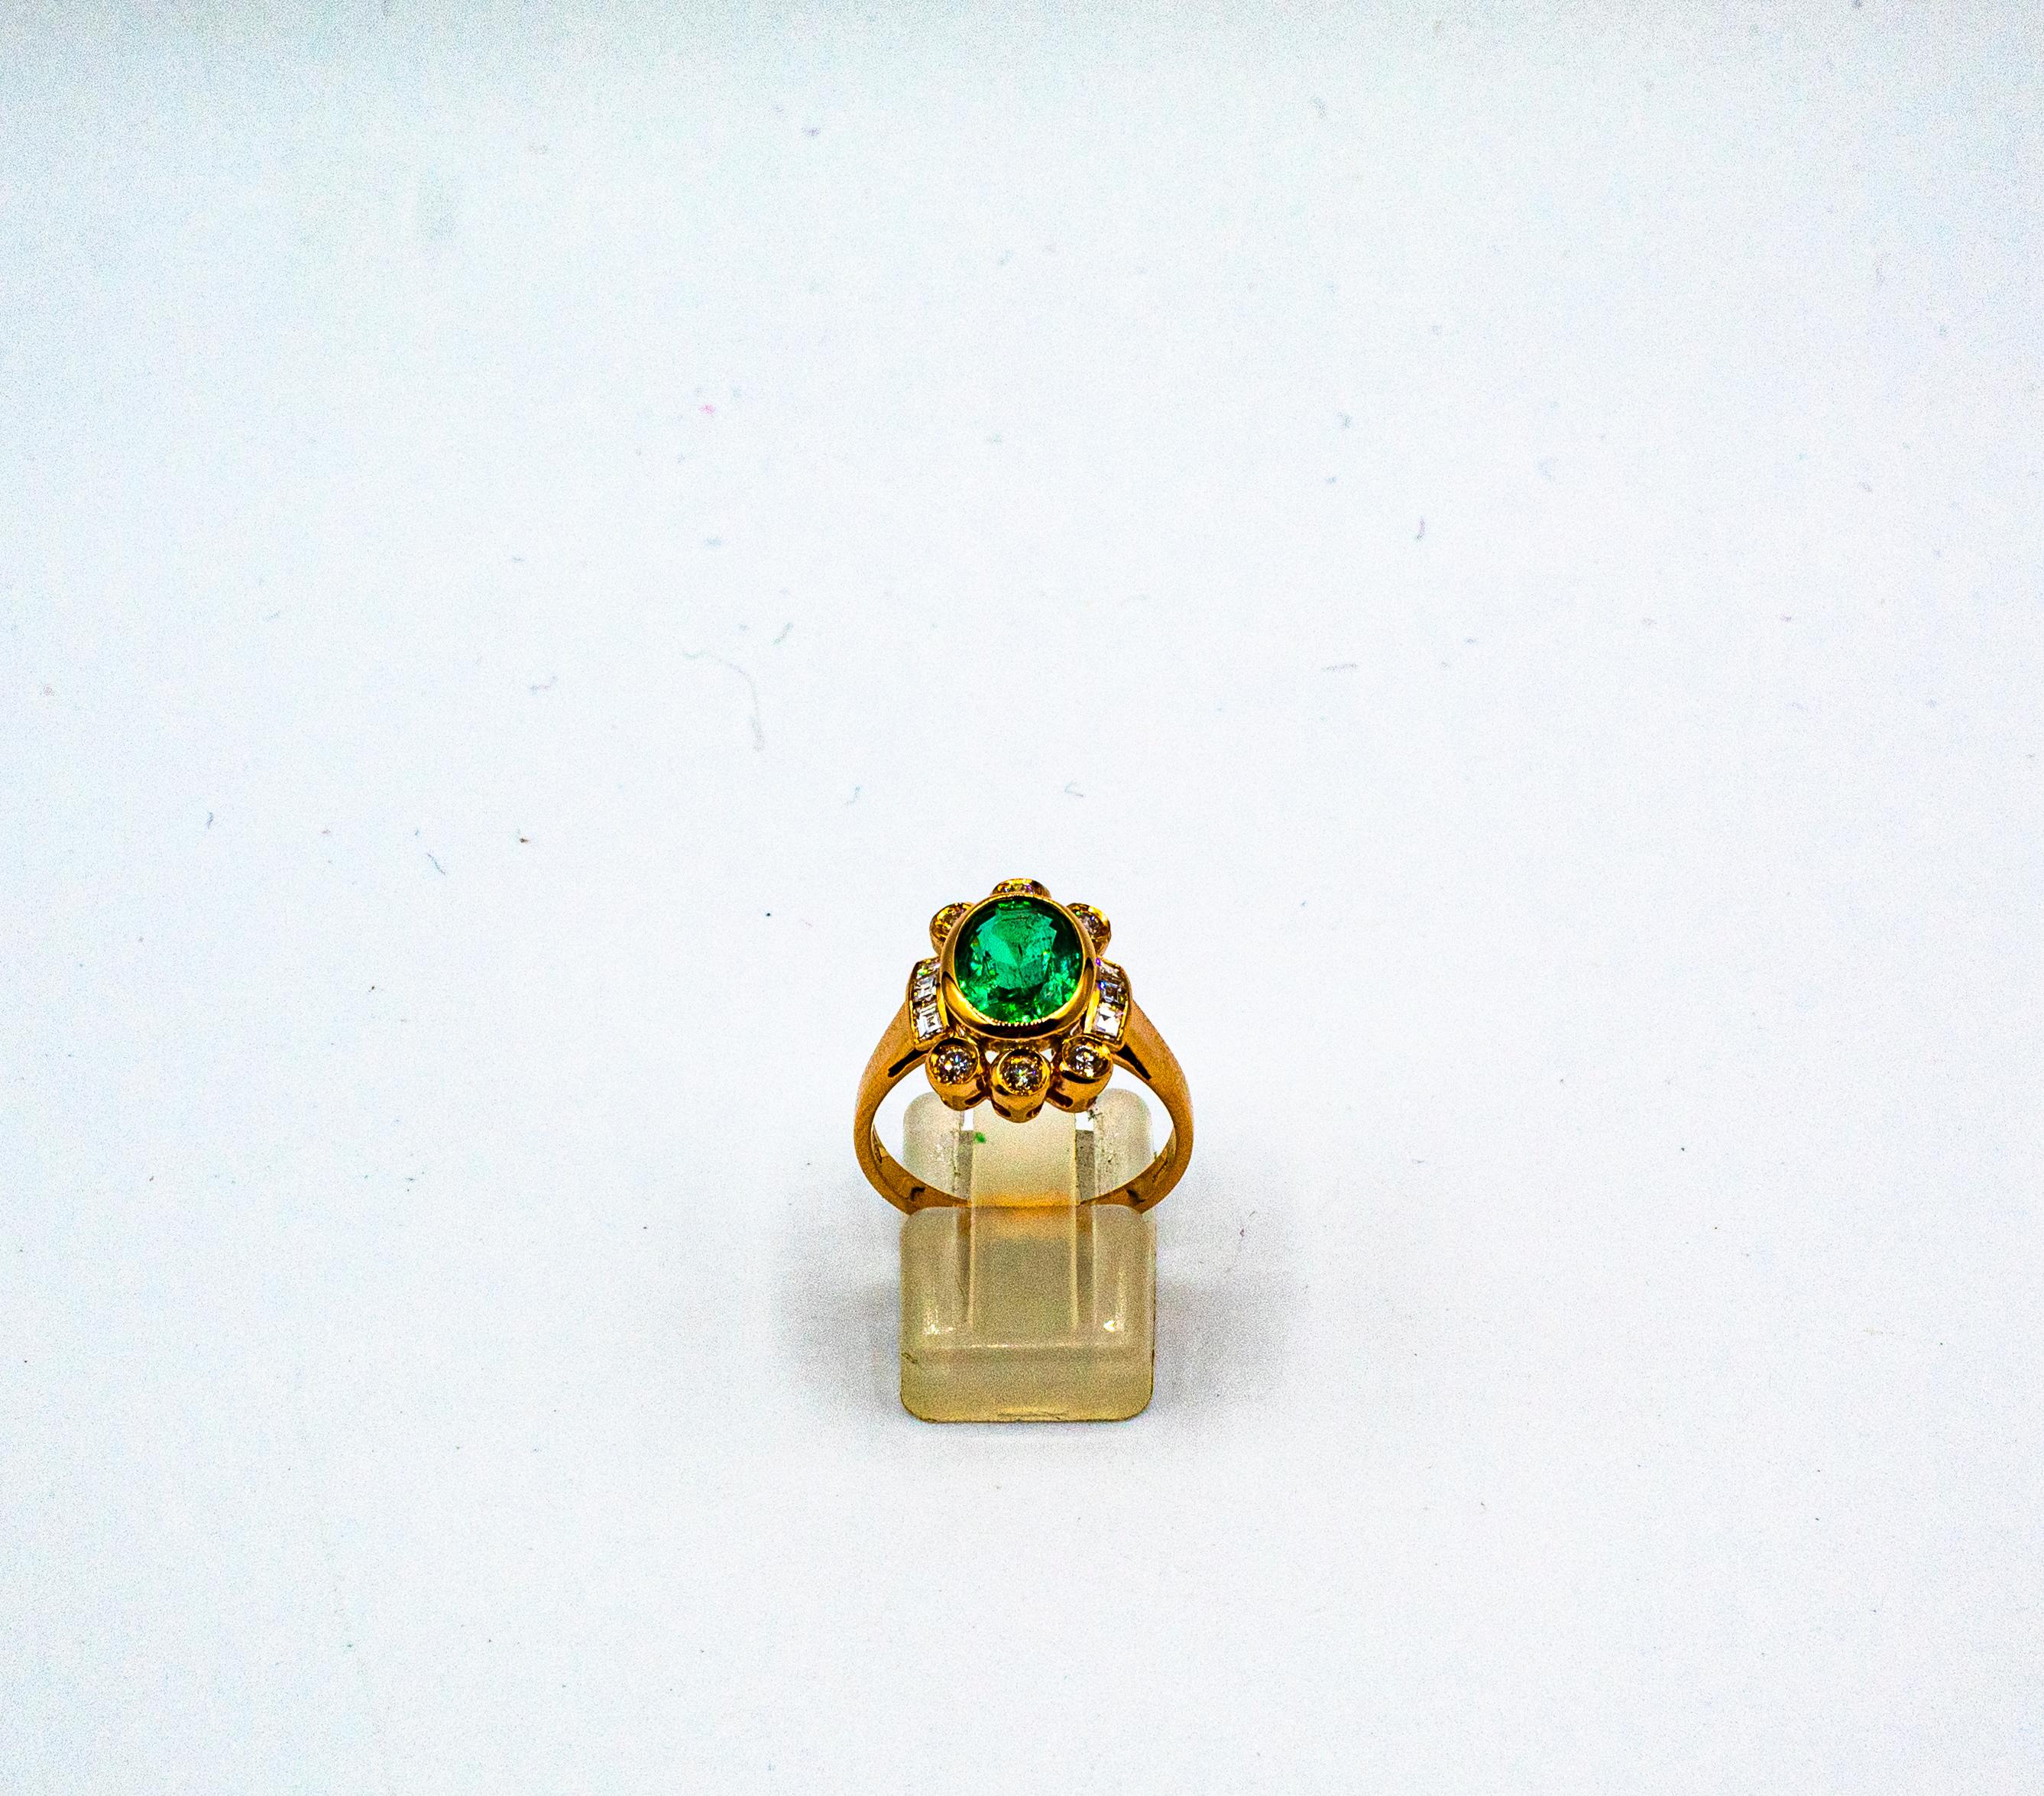 Brilliant Cut Art Deco Style Oval Cut Emerald White Diamond Yellow Gold Cocktail Ring For Sale